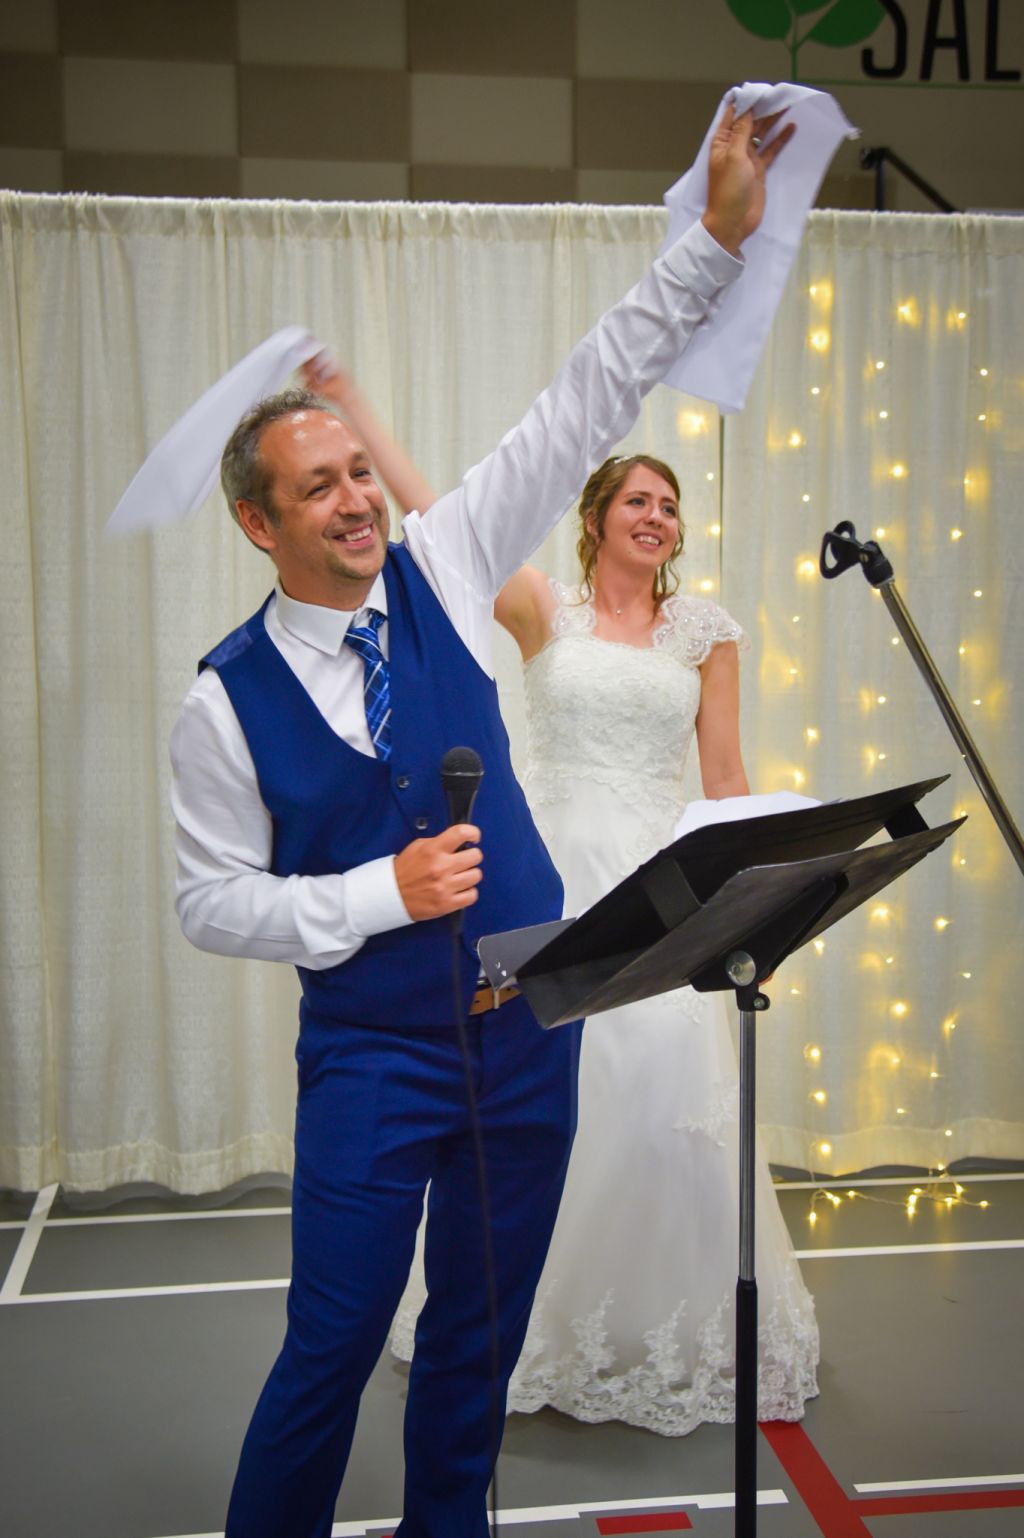 A groom holds a microphone while he and his bride encourage their audience to celebrate their union